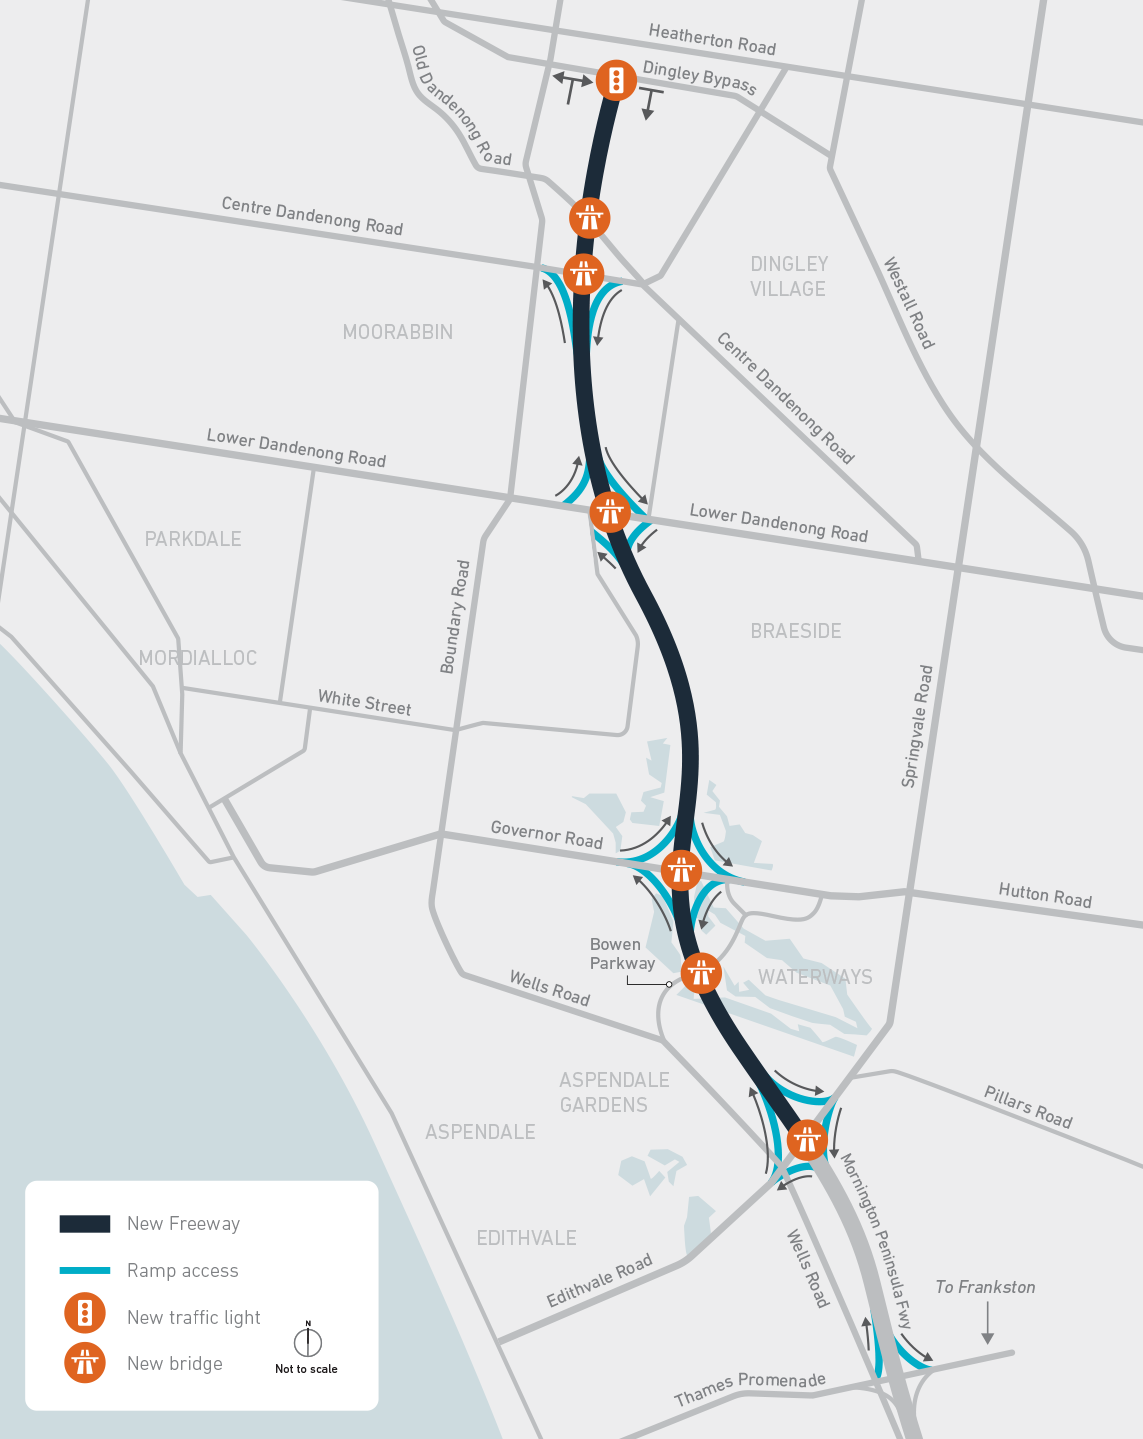 Mordialloc Freeway access overview map